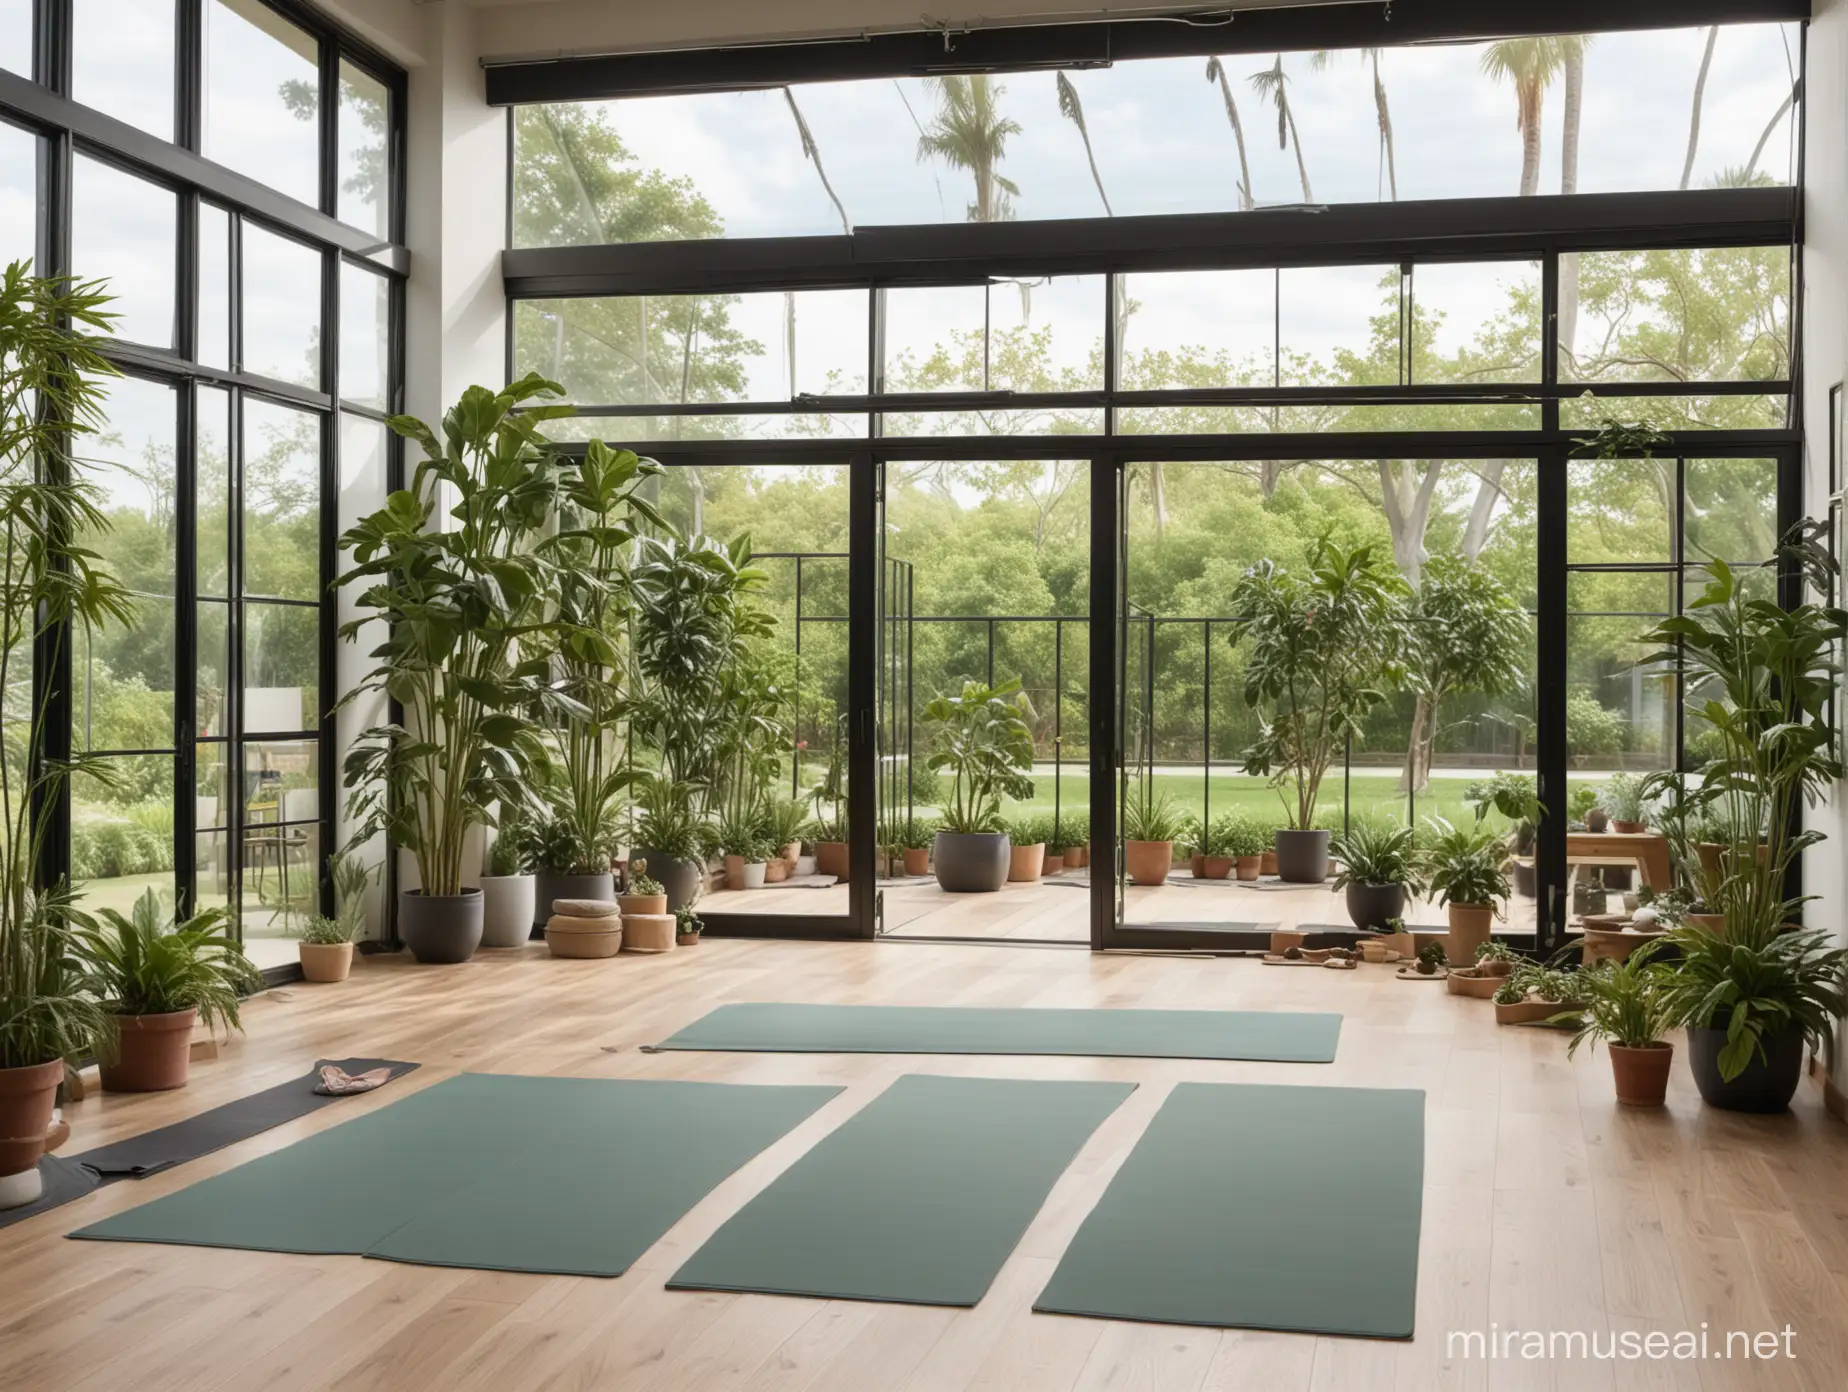 Sunny Yoga Studio with Indoor and Outdoor Mats Amidst Lush Greenery